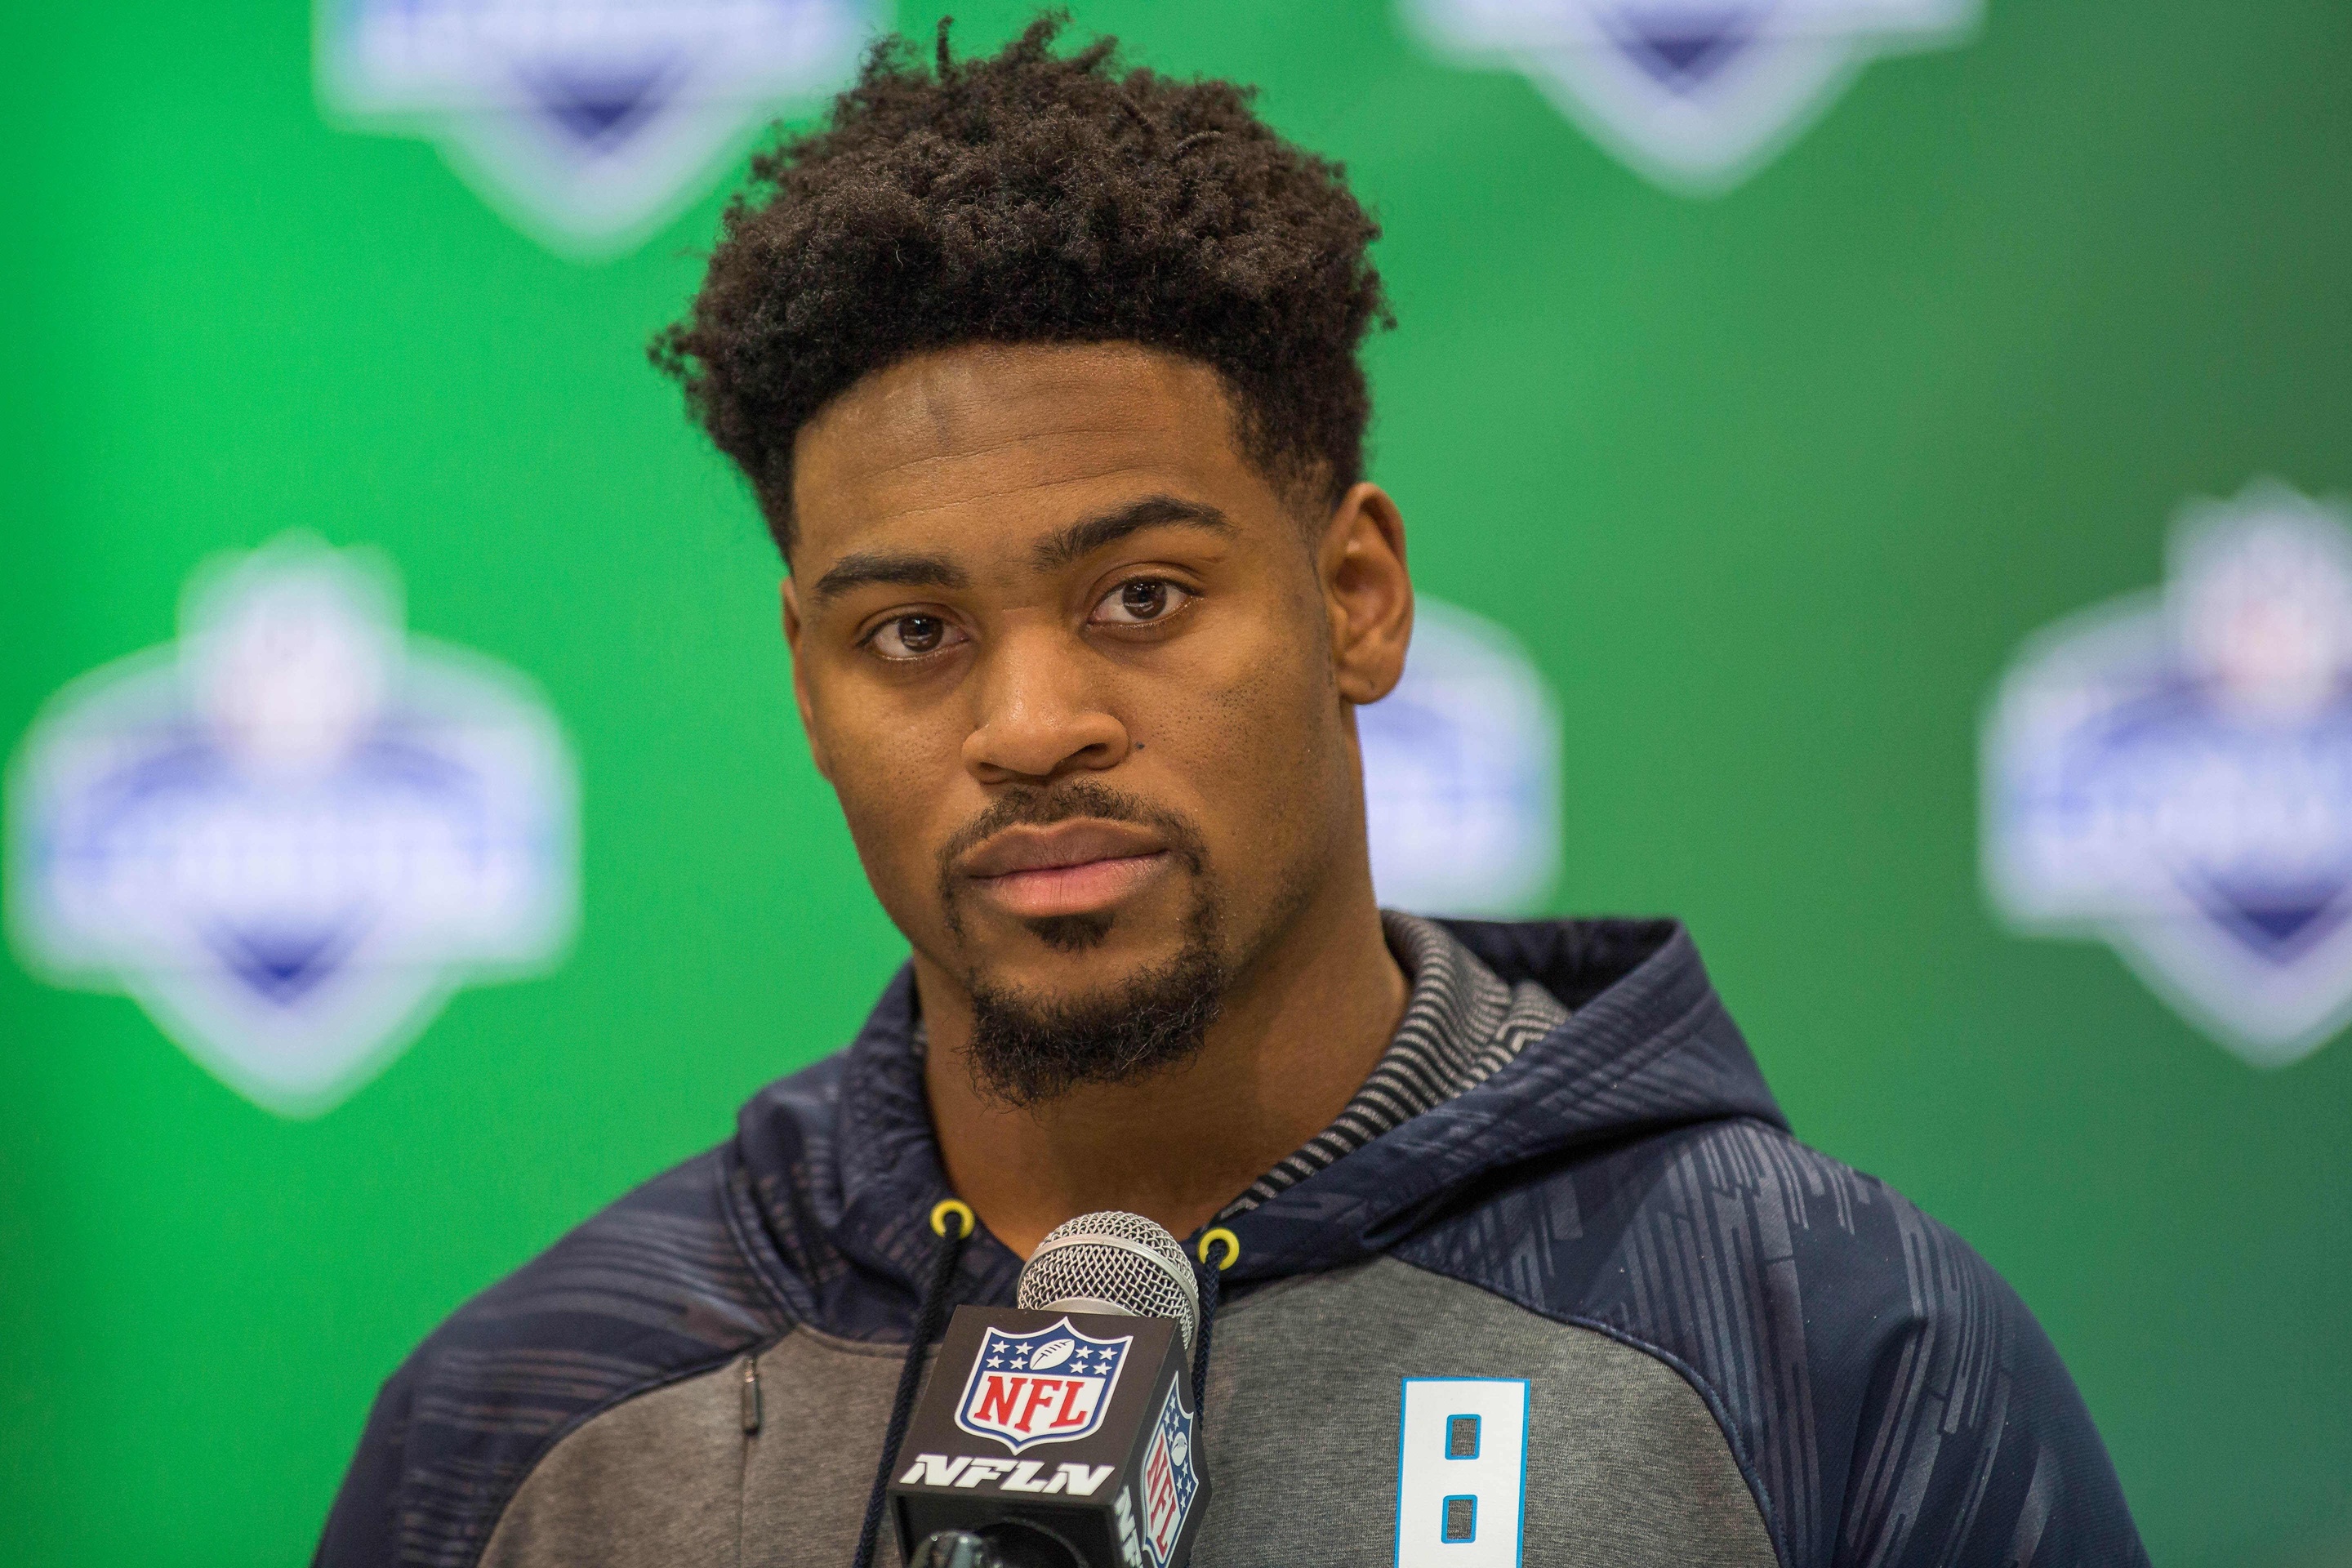 Report: NFL team requested polygraph for Gareon Conley, who passed